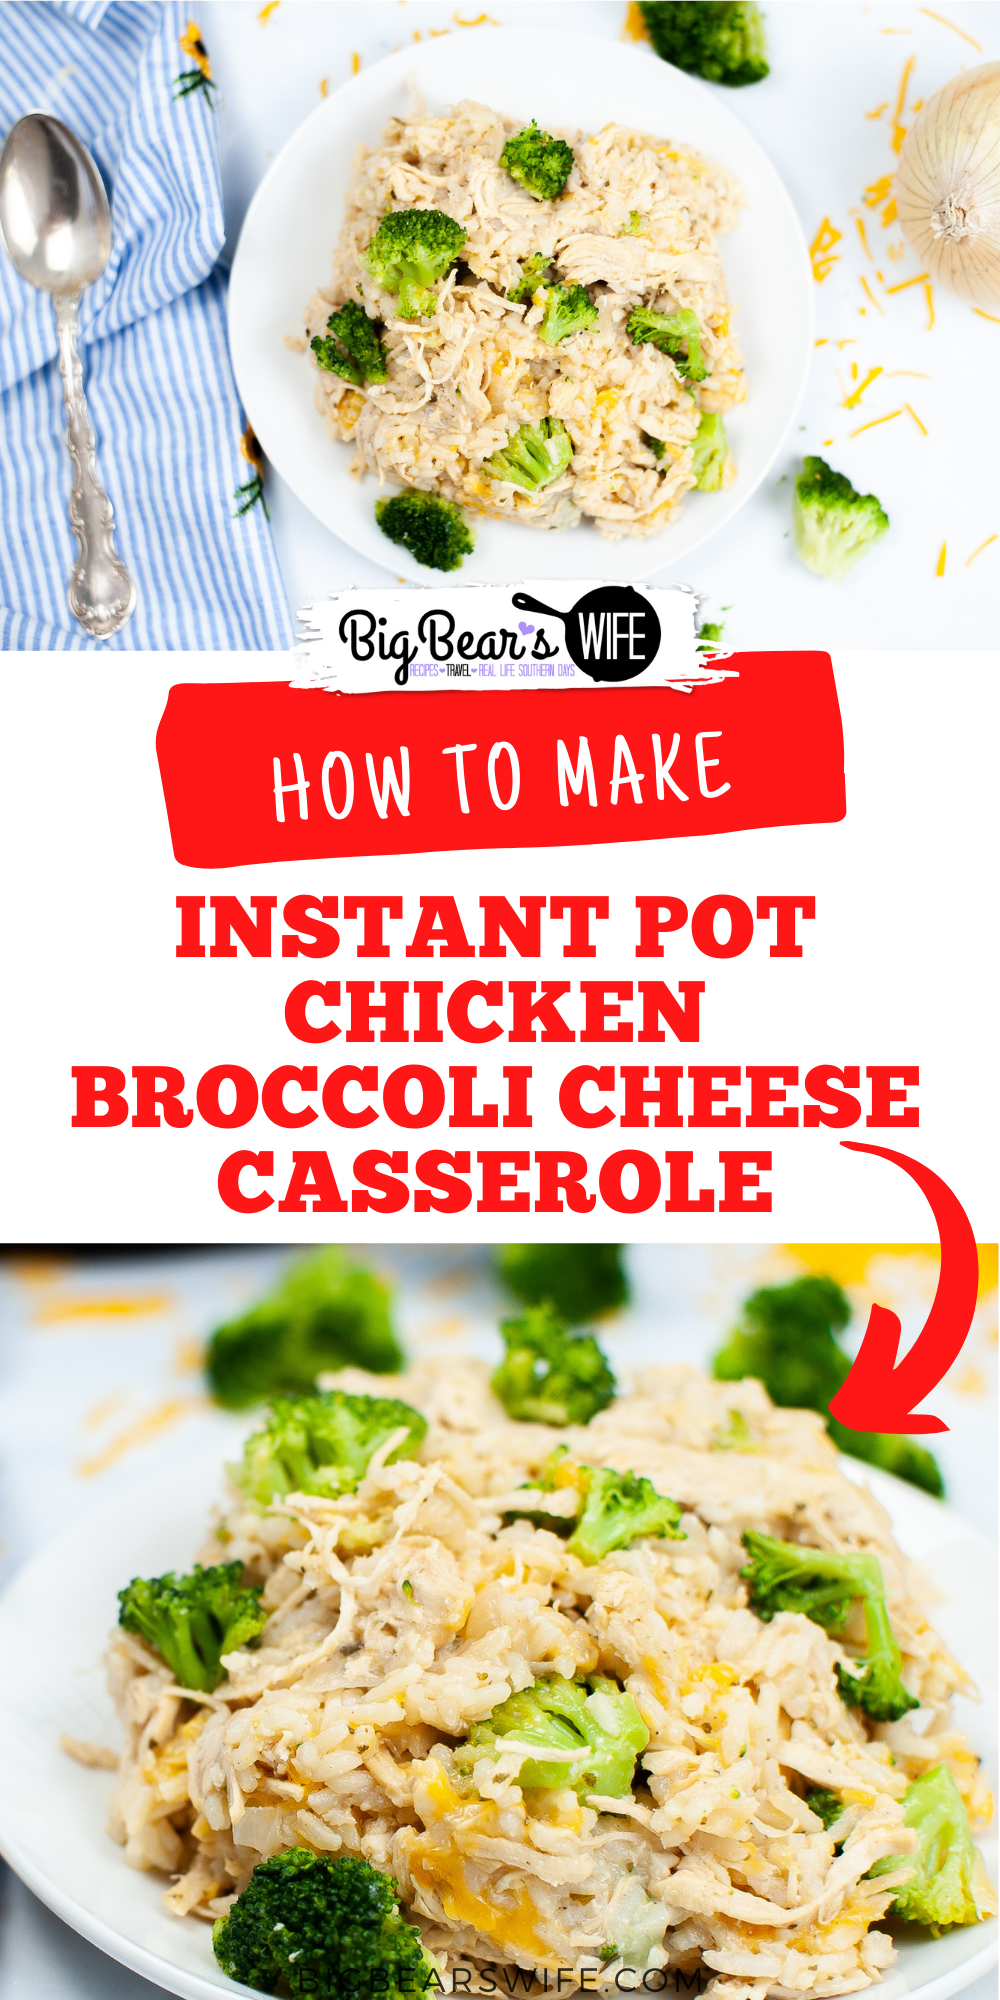 Make a homemade Instant Pot Chicken Broccoli Cheese Casserole in your instant pot for a one pot, family favorite meal that is easy on time and budget.  via @bigbearswife